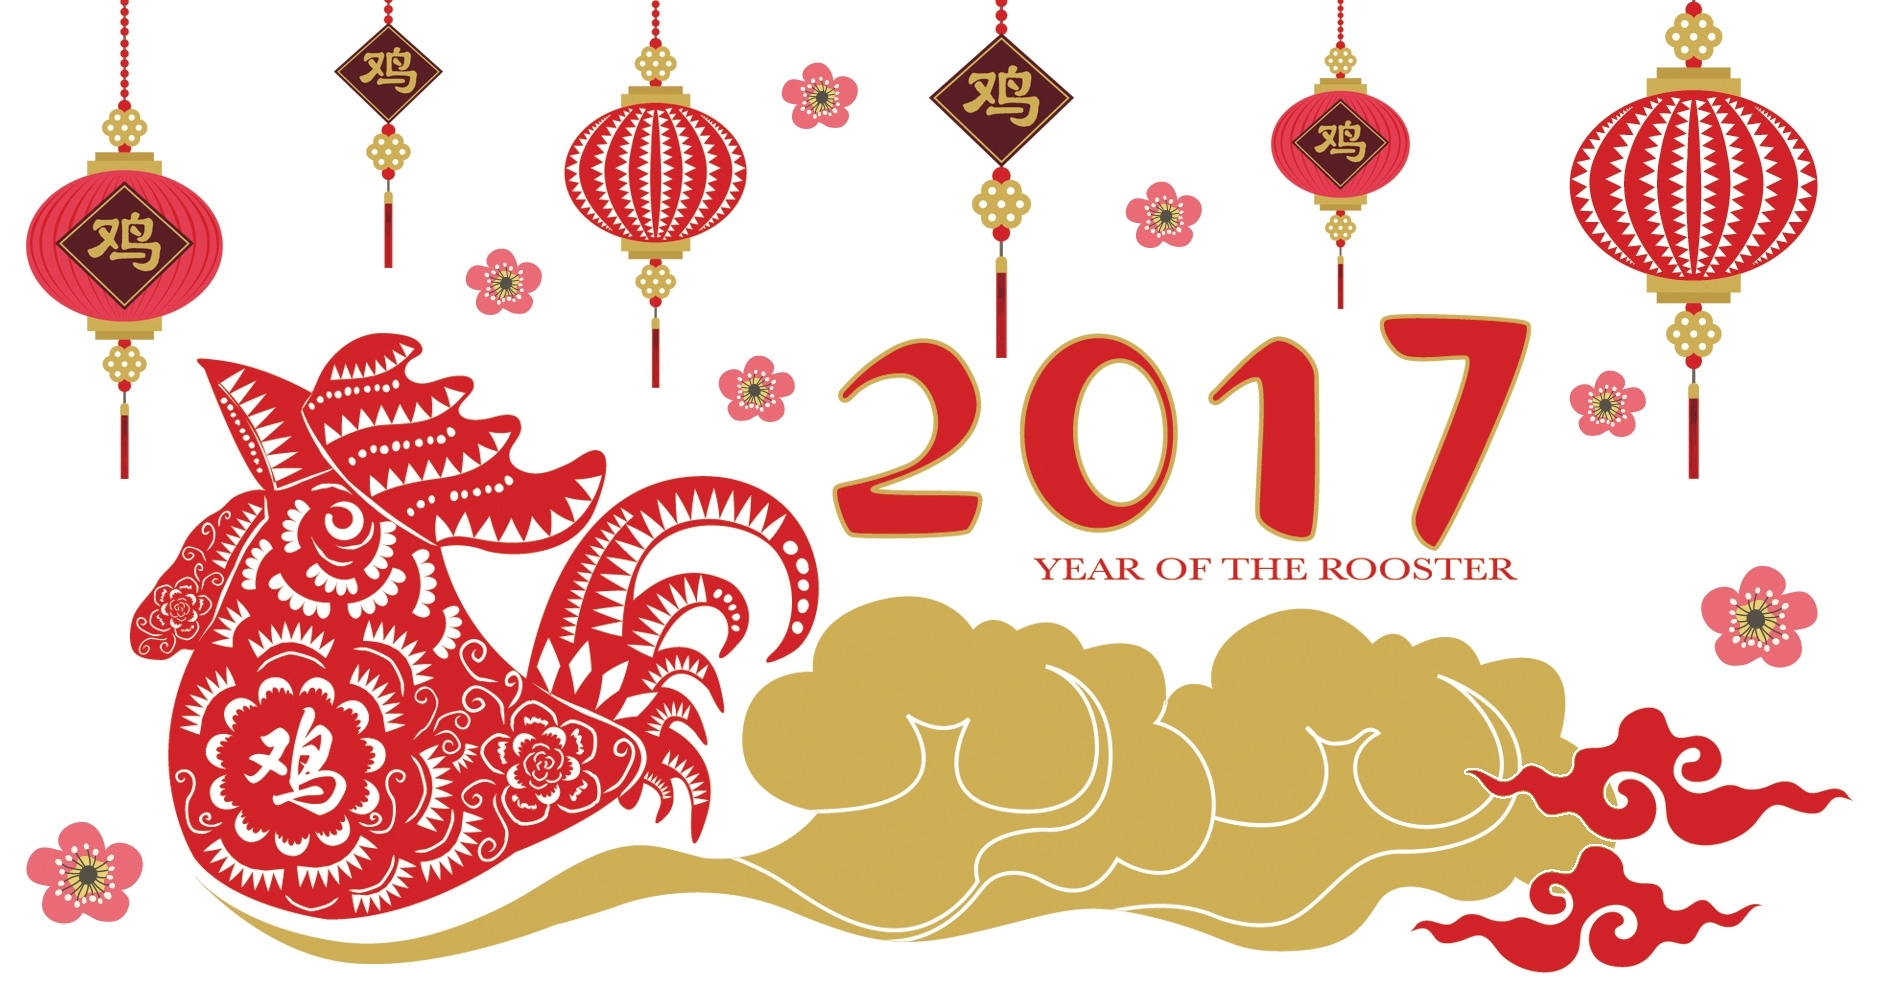 Happy Chinese New Year: 2017 Is The Year Of The Rooster